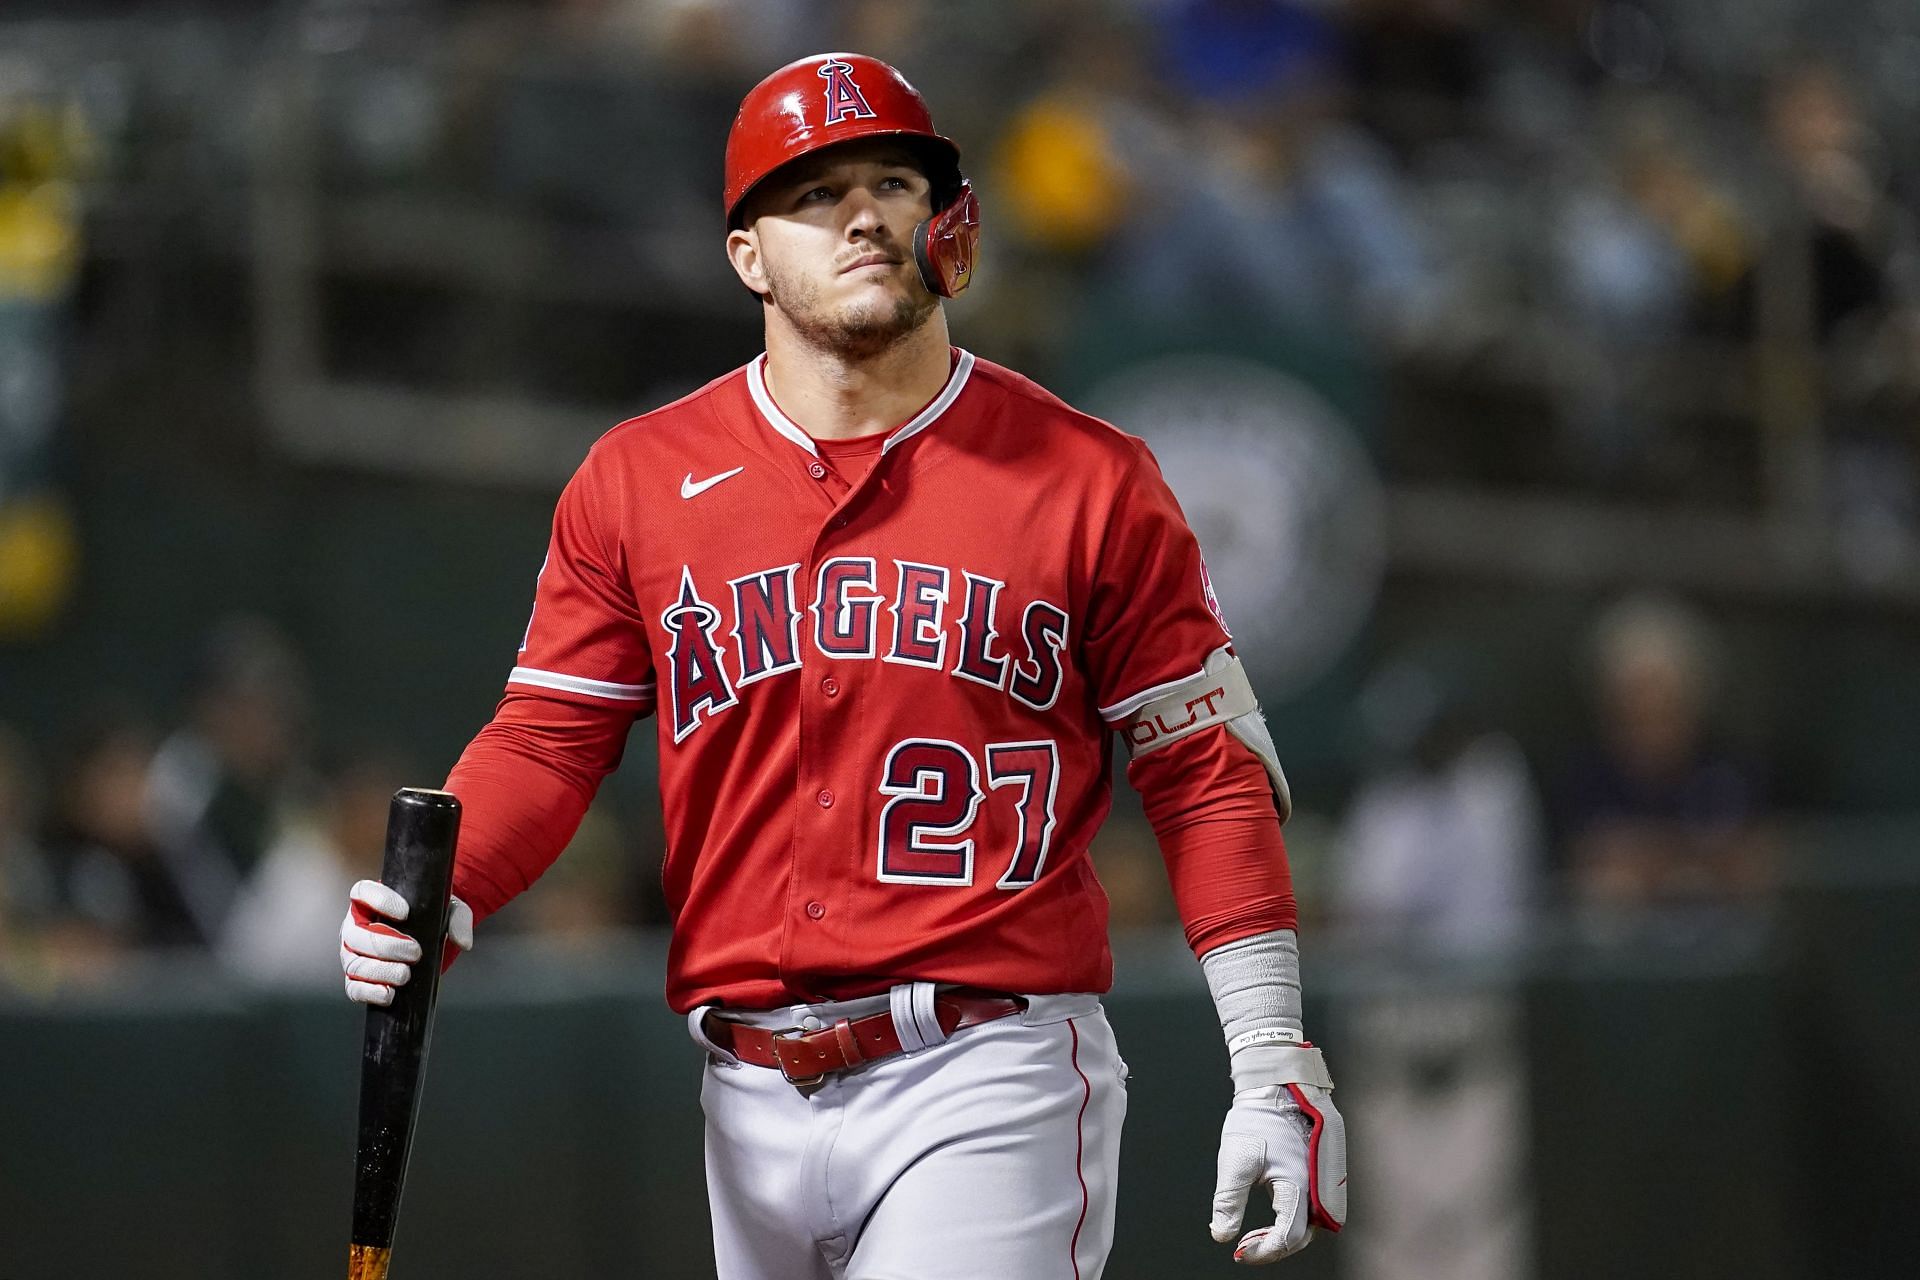 Mike Trout stats: Mike Trout Stats: A look at the Angels' star's